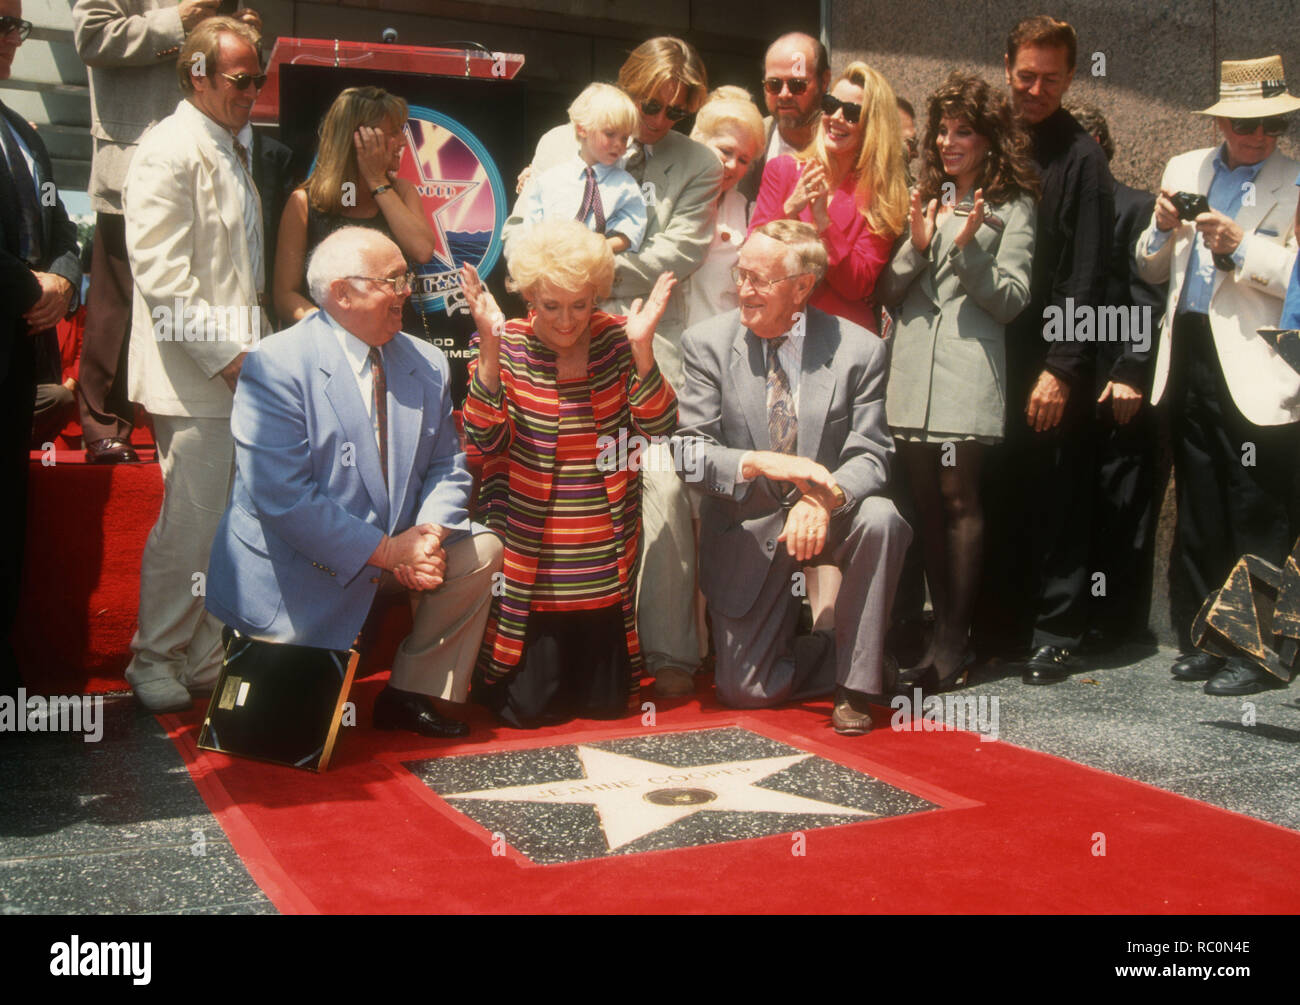 HOLLYWOOD, CA - AUGUST 20: Actor Corbin Bernsen, Johnny Grant, Caren Bernsen, actress Jeanne Cooper, Collin Bernsen, actress Melody Thomas Scott, actress Kate Linder and actor Quinn K. Redeker attend Actress Jeanne Cooper receives the 1,987th star on Hollywood Walk of Fame on August 20, 1993 on Hollywood Blvd in Hollywood, California. Photo by Barry King/Alamy Stock Photo Stock Photo